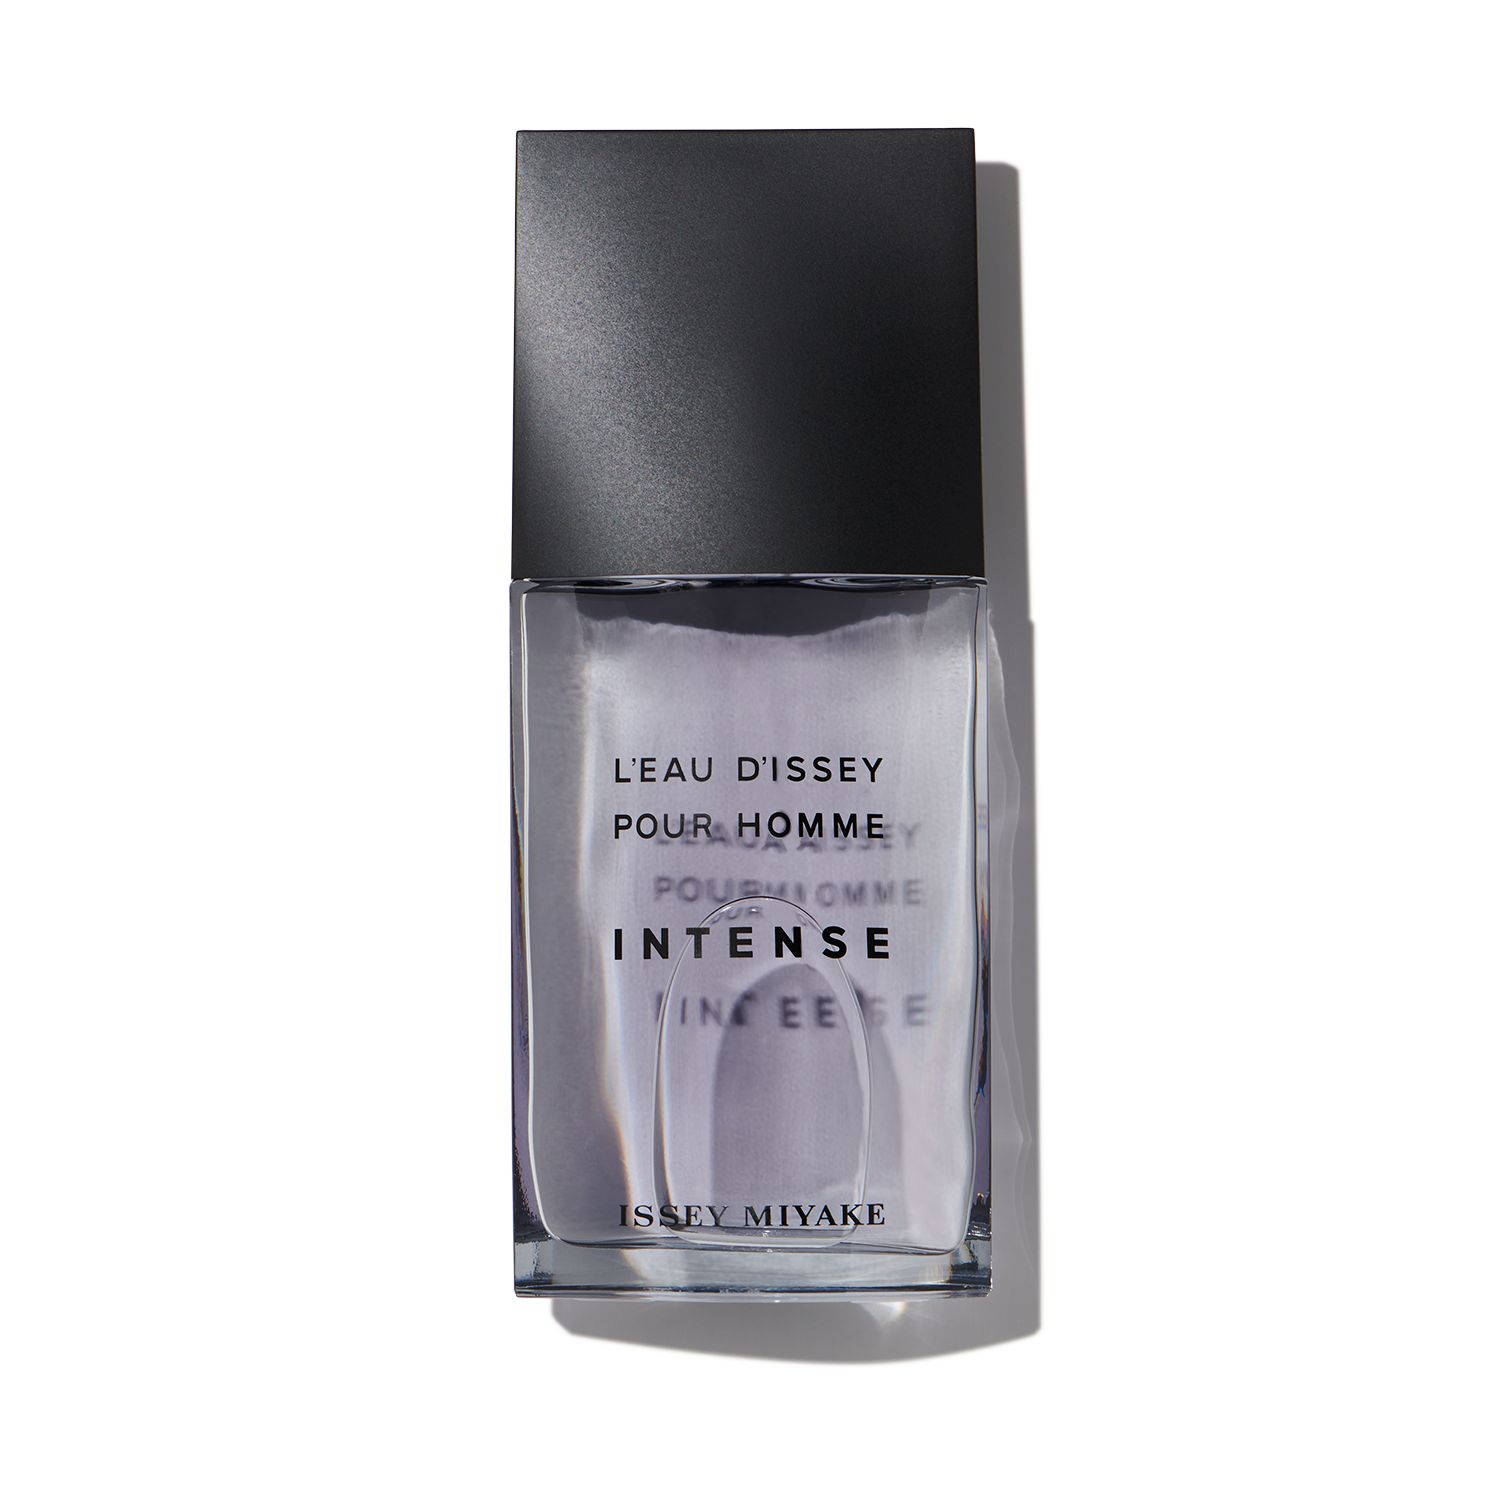 Issey Miyake L'Eau d'Issey Pour Homme Intense for $16.95 per month